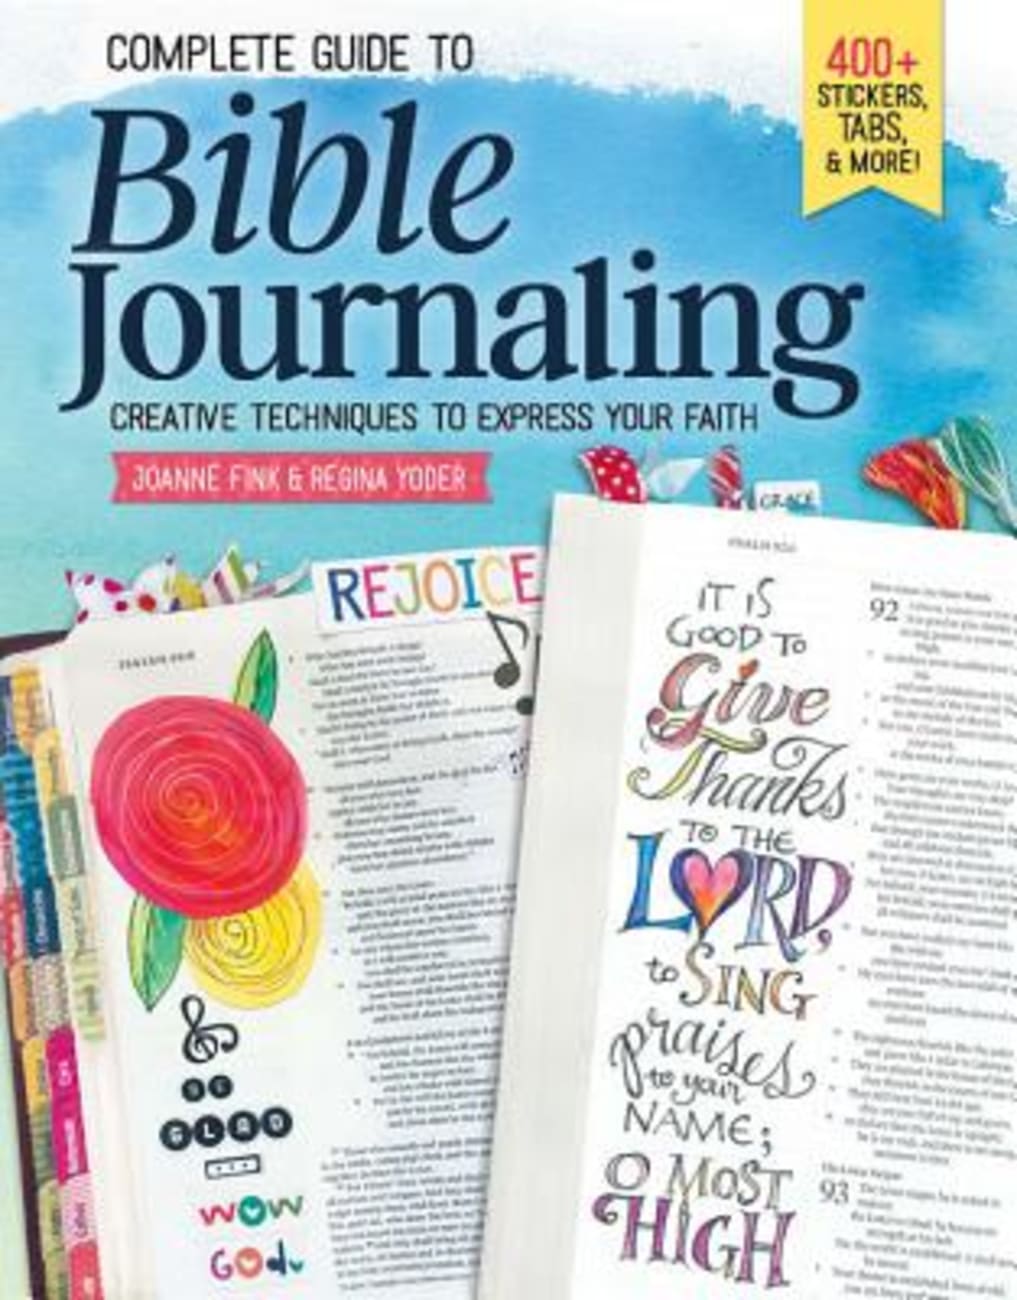 Complete Guide to Bible Journaling: Creative Techniques to Express Your Faith Paperback